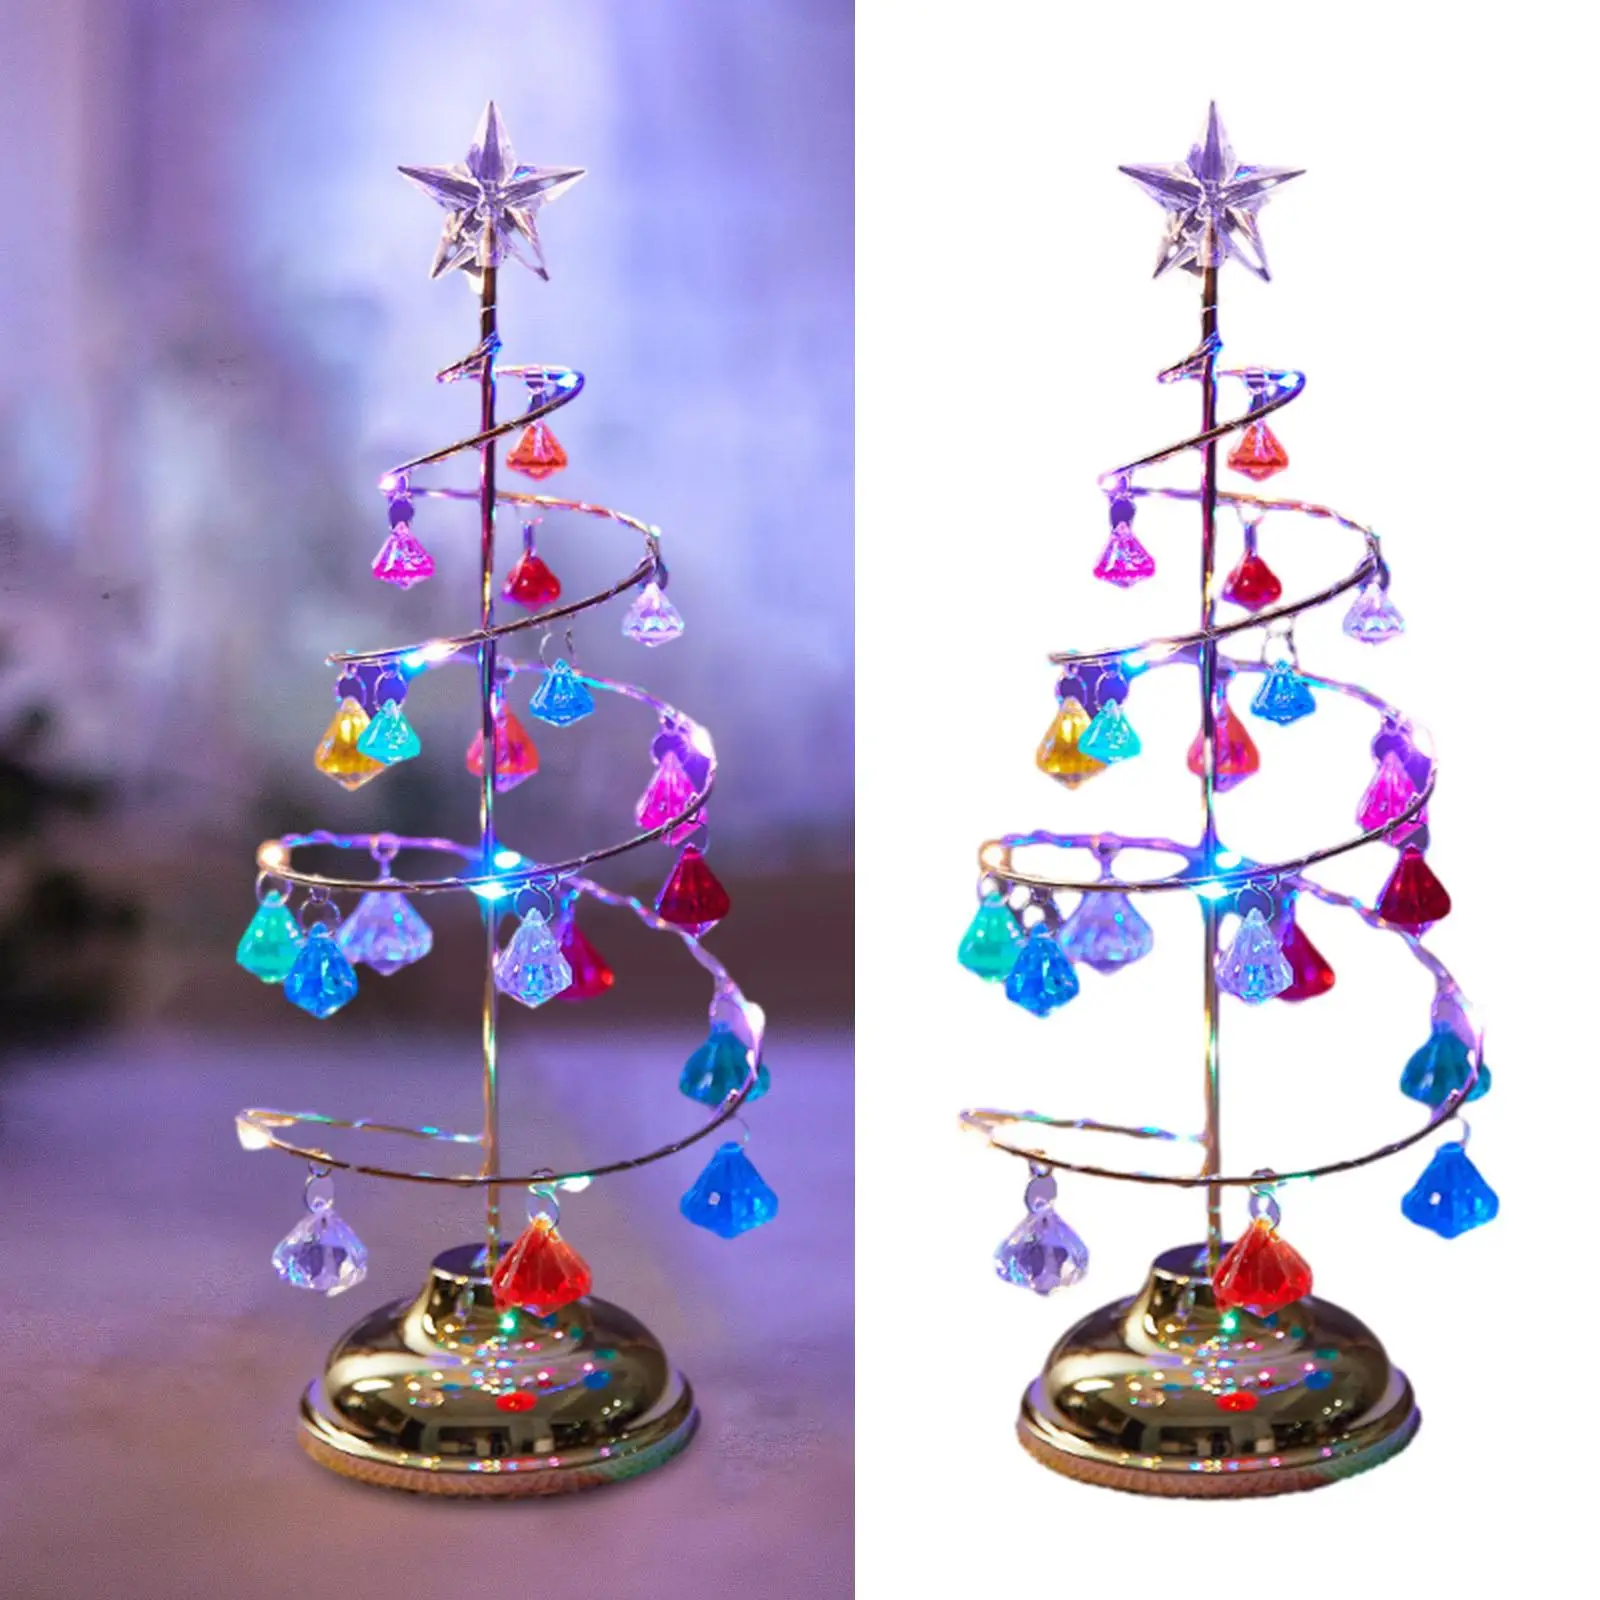 Crystal Spiral Christmas Tree Lamp Bedside Lamp Decoration Christmas Tree Lamps Ornament for Bedroom Party Xmas Winter Home